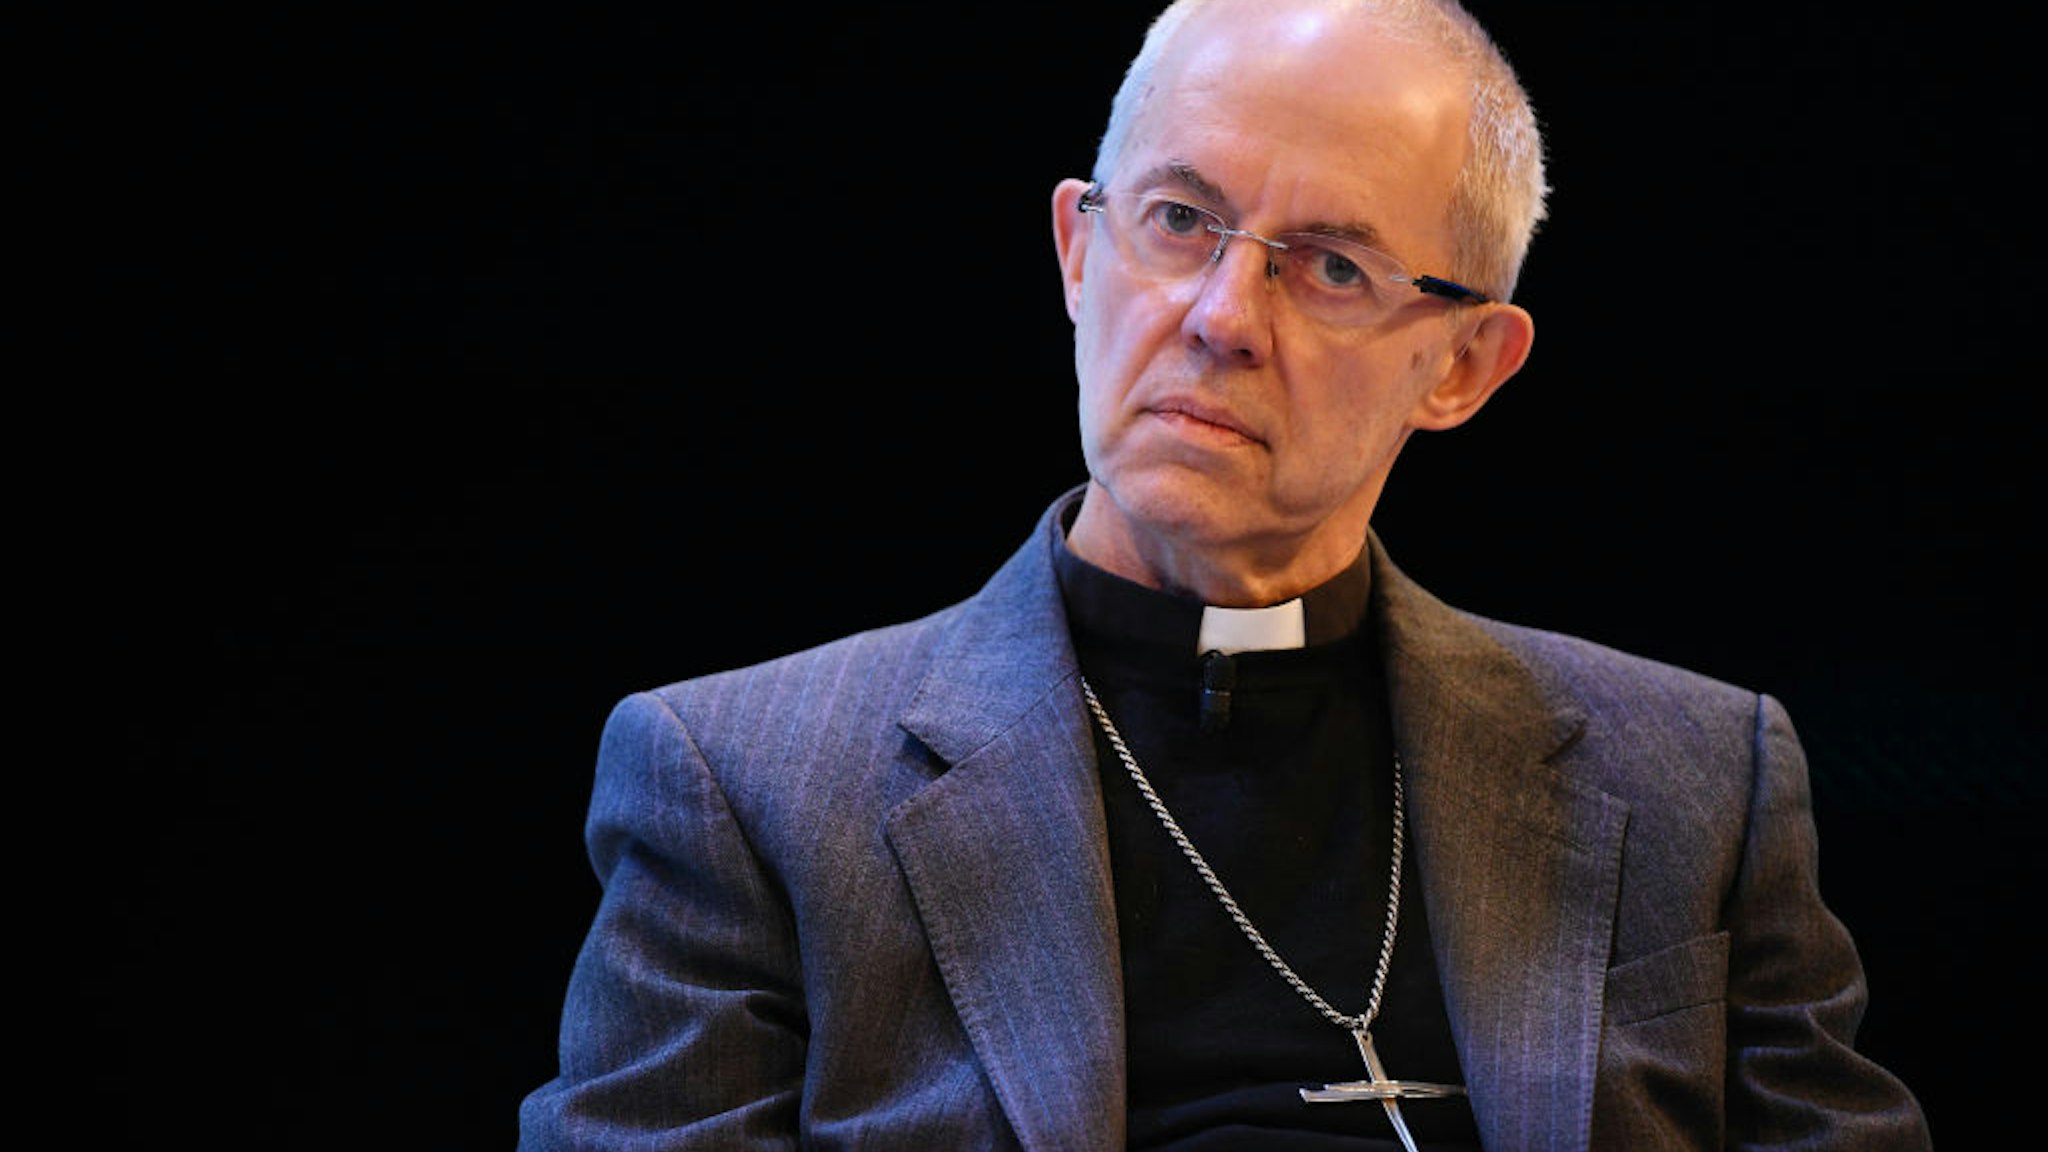 The Most Reverend Justin Welby, Archbishop of Canterbury talks at a debate on social inequality at the annual CBI conference on November 18, 2019 in London, England.